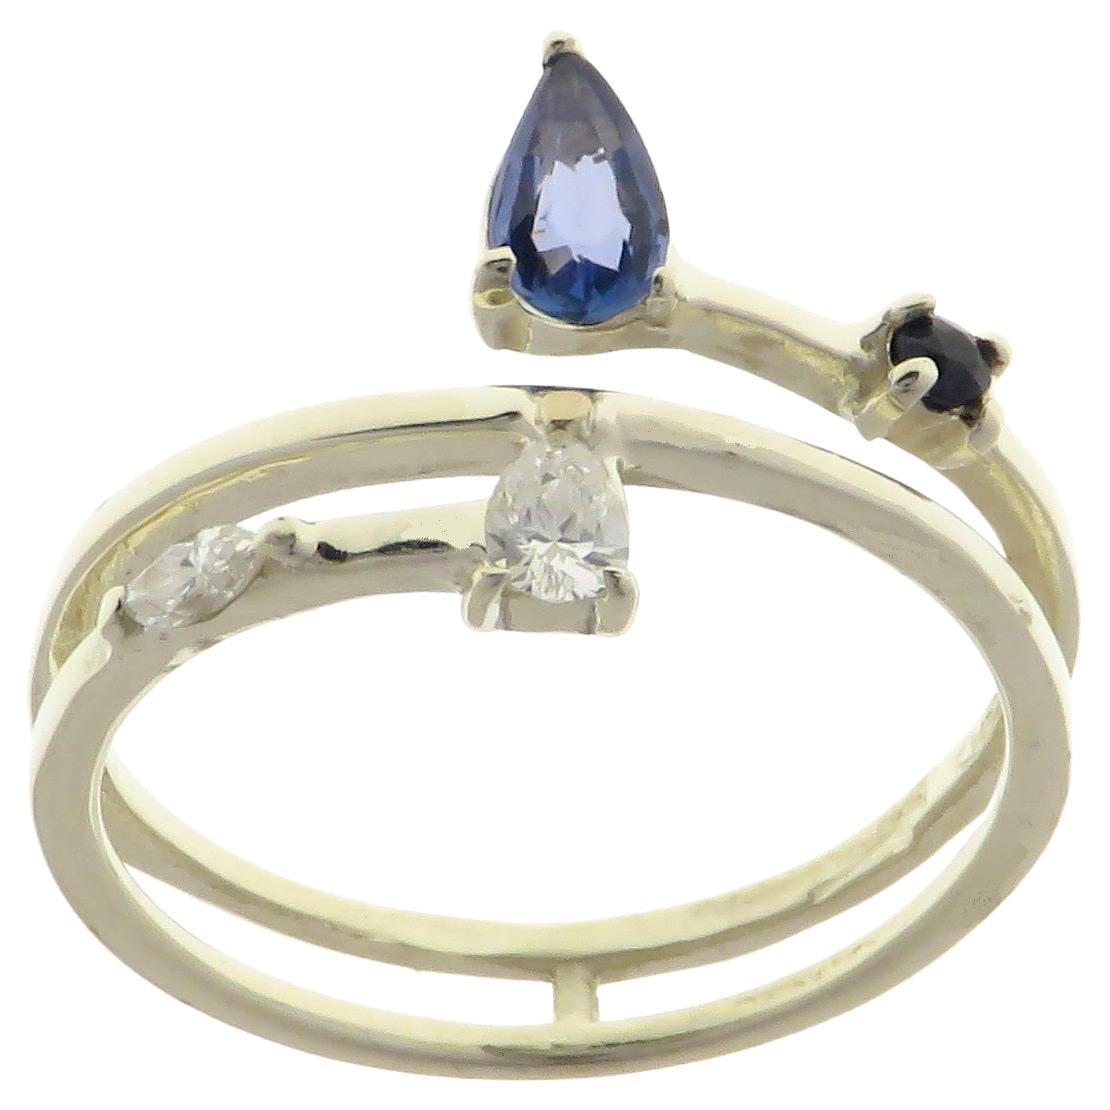 Diamonds Sapphires 9 Karat White Gold Band Ring Handcrafted in Italy